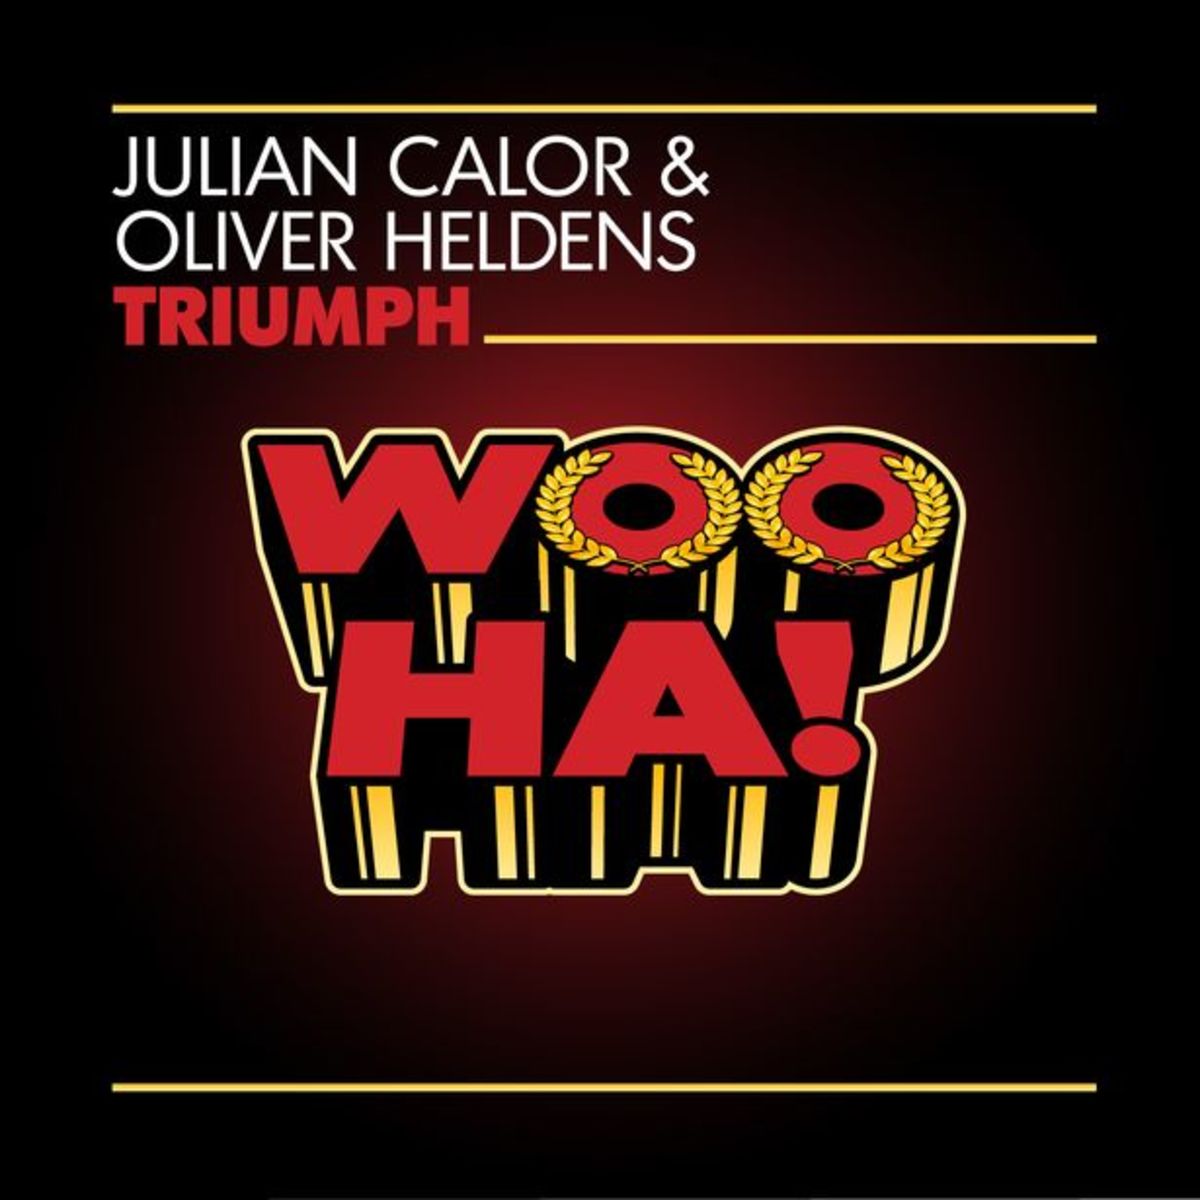 EDM Exclusive Premier: New Electronic Music From Julian Calor & Oliver Heldens - "Triumph"